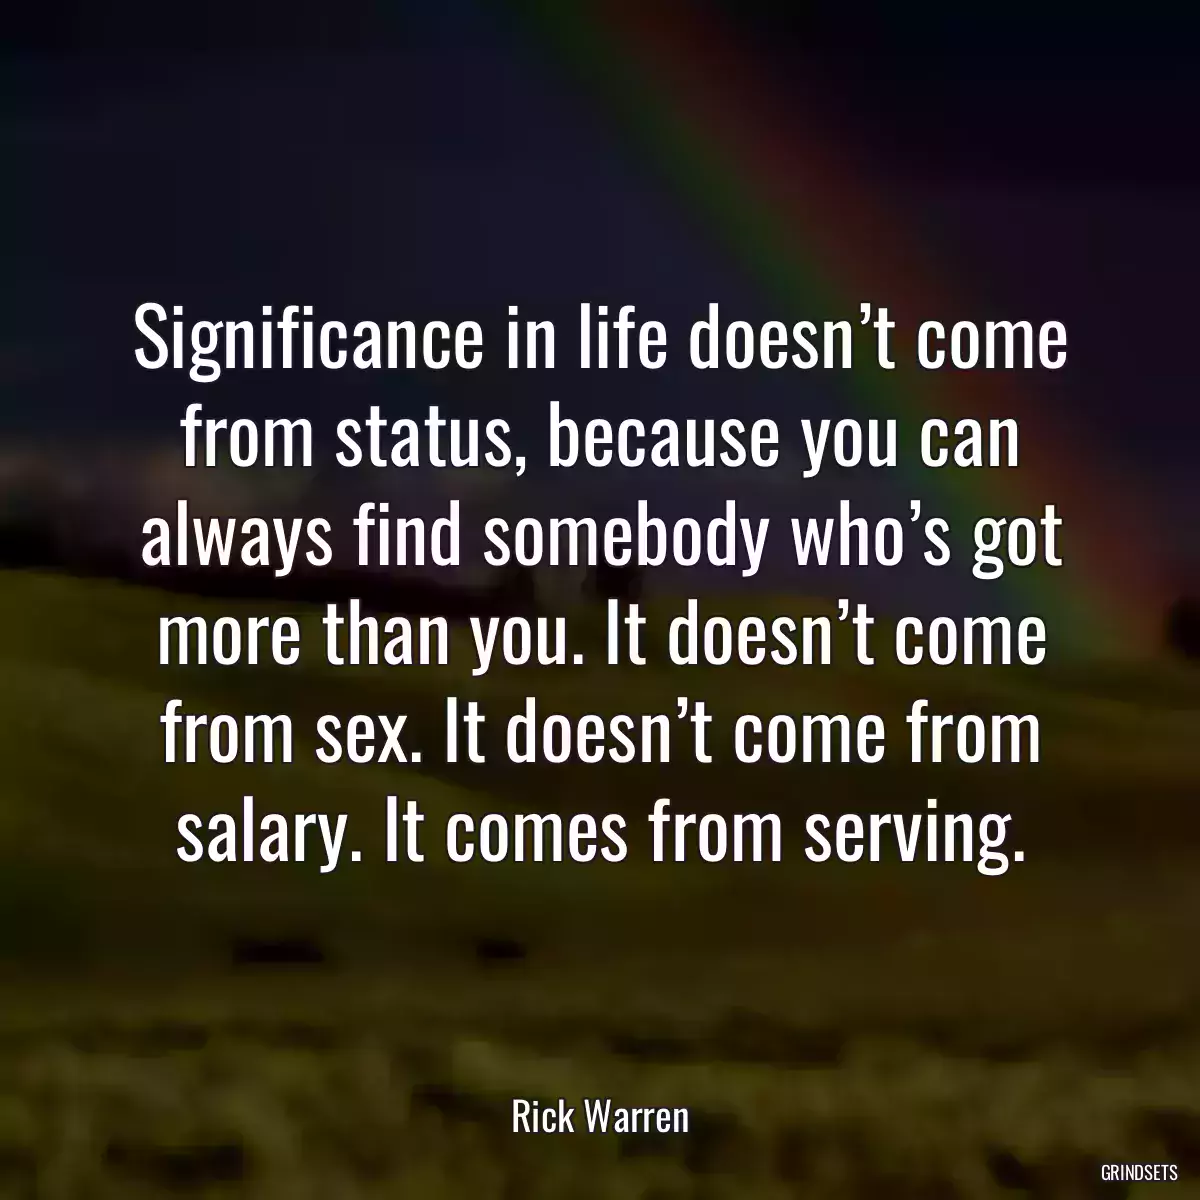 Significance in life doesn’t come from status, because you can always find somebody who’s got more than you. It doesn’t come from sex. It doesn’t come from salary. It comes from serving.